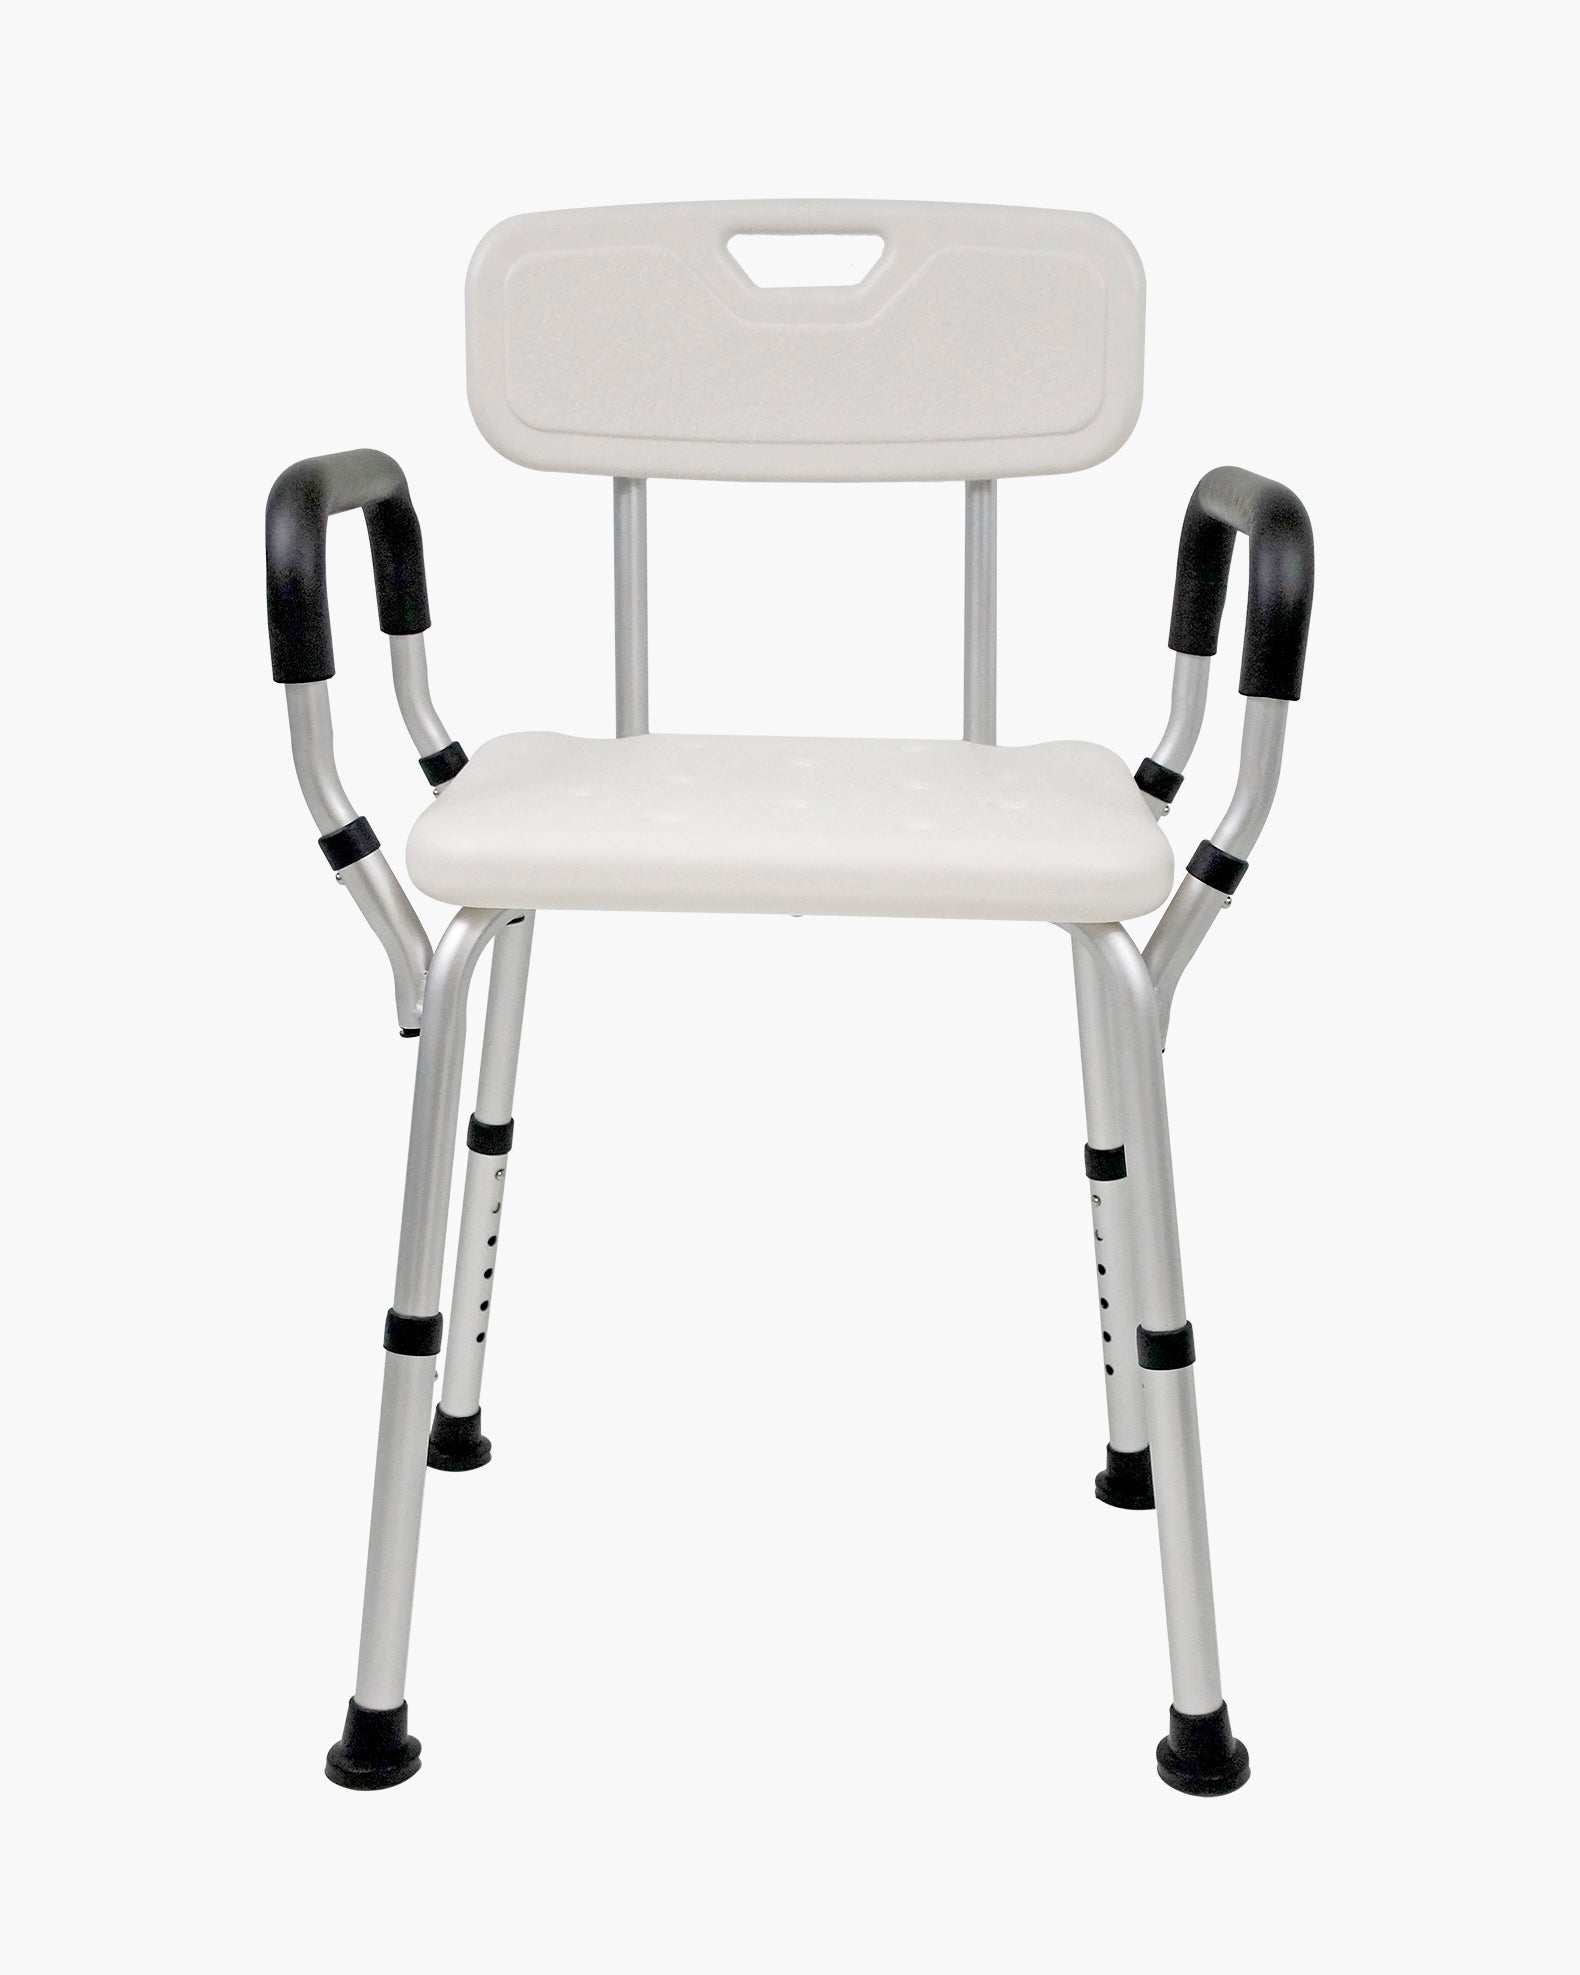 Adjustable Shower Chair With Armrest - Comfortable Mobility Aid for Showering